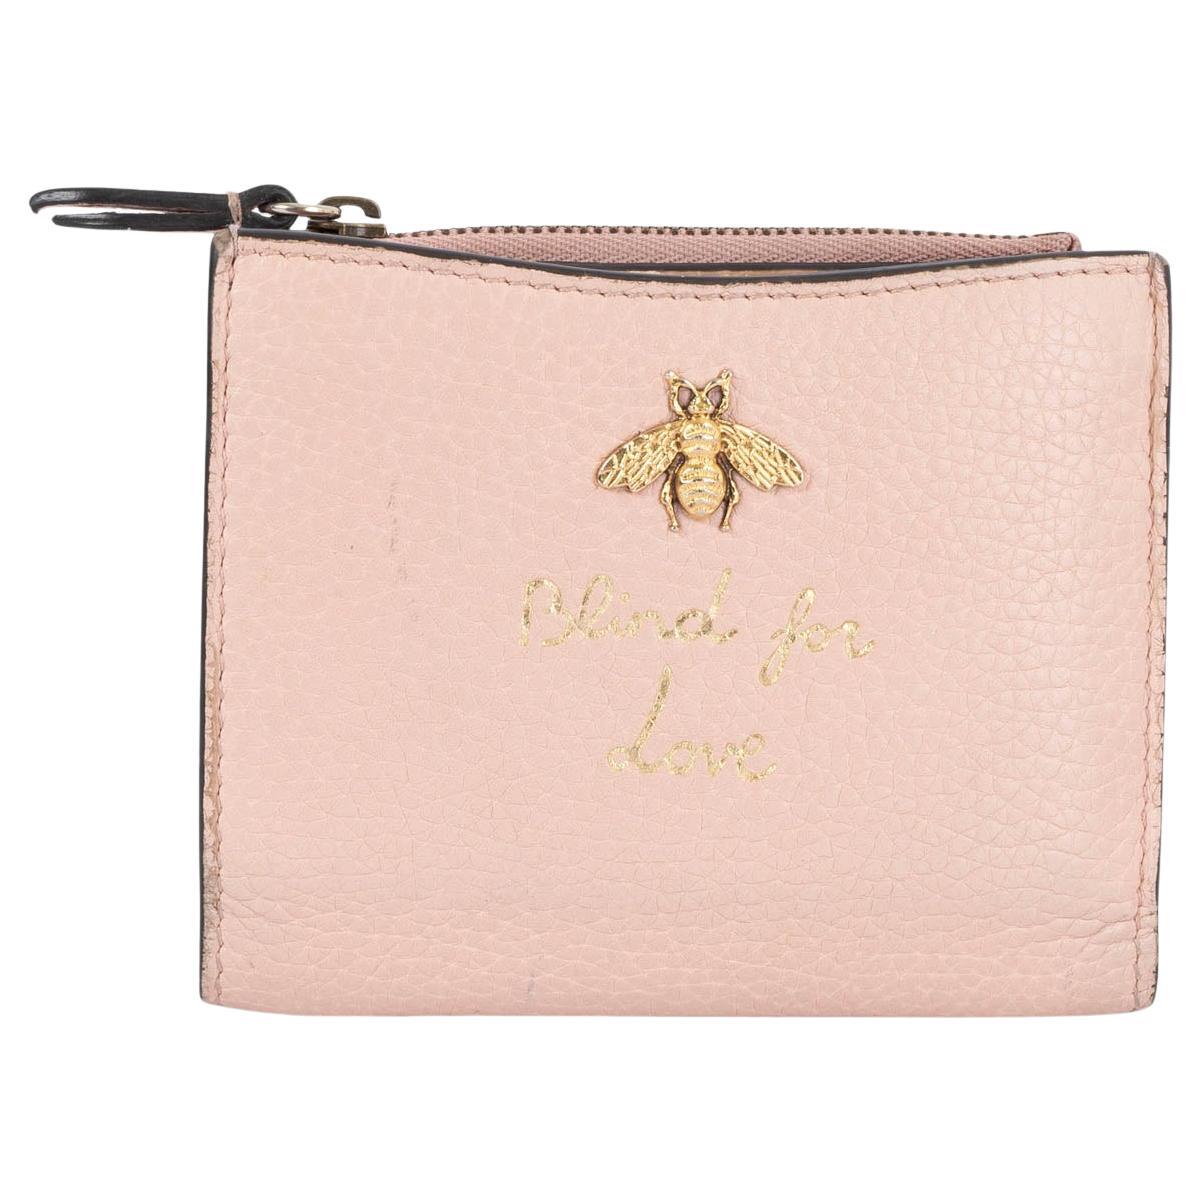 GUCCI pale pink leather BLIND FOR LOVE Small Wallet